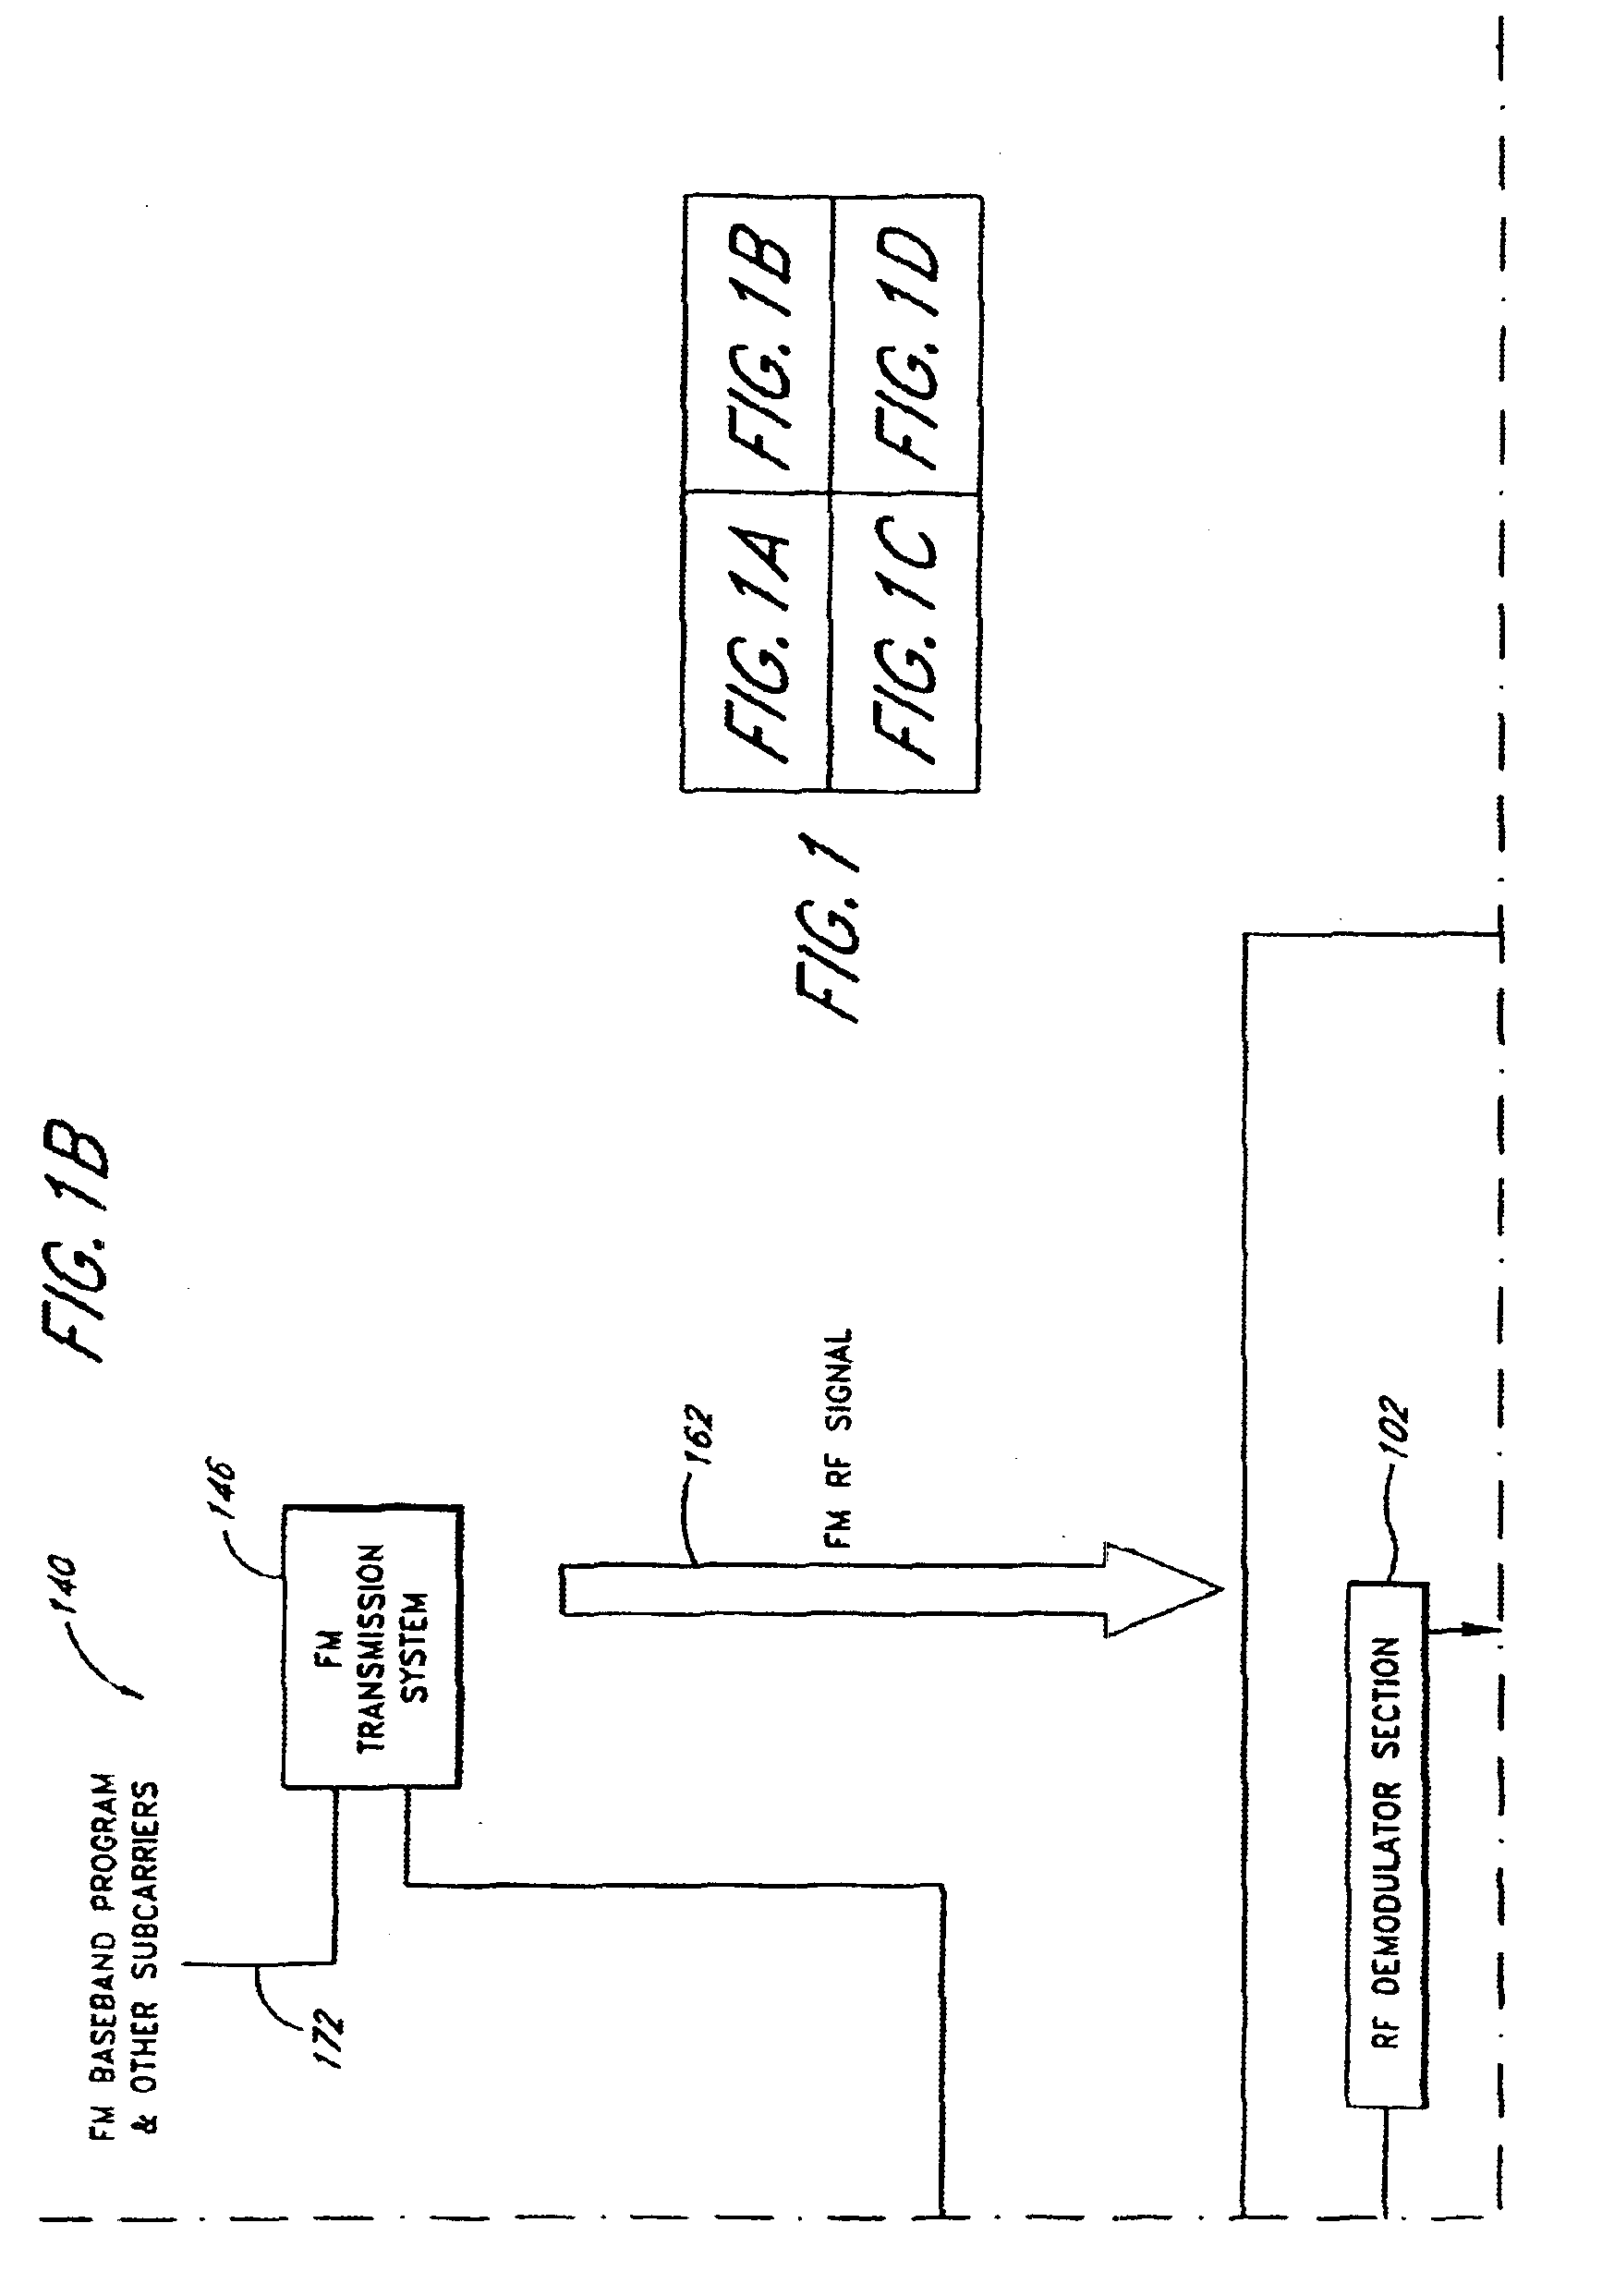 System and method for ordering and delivering media content